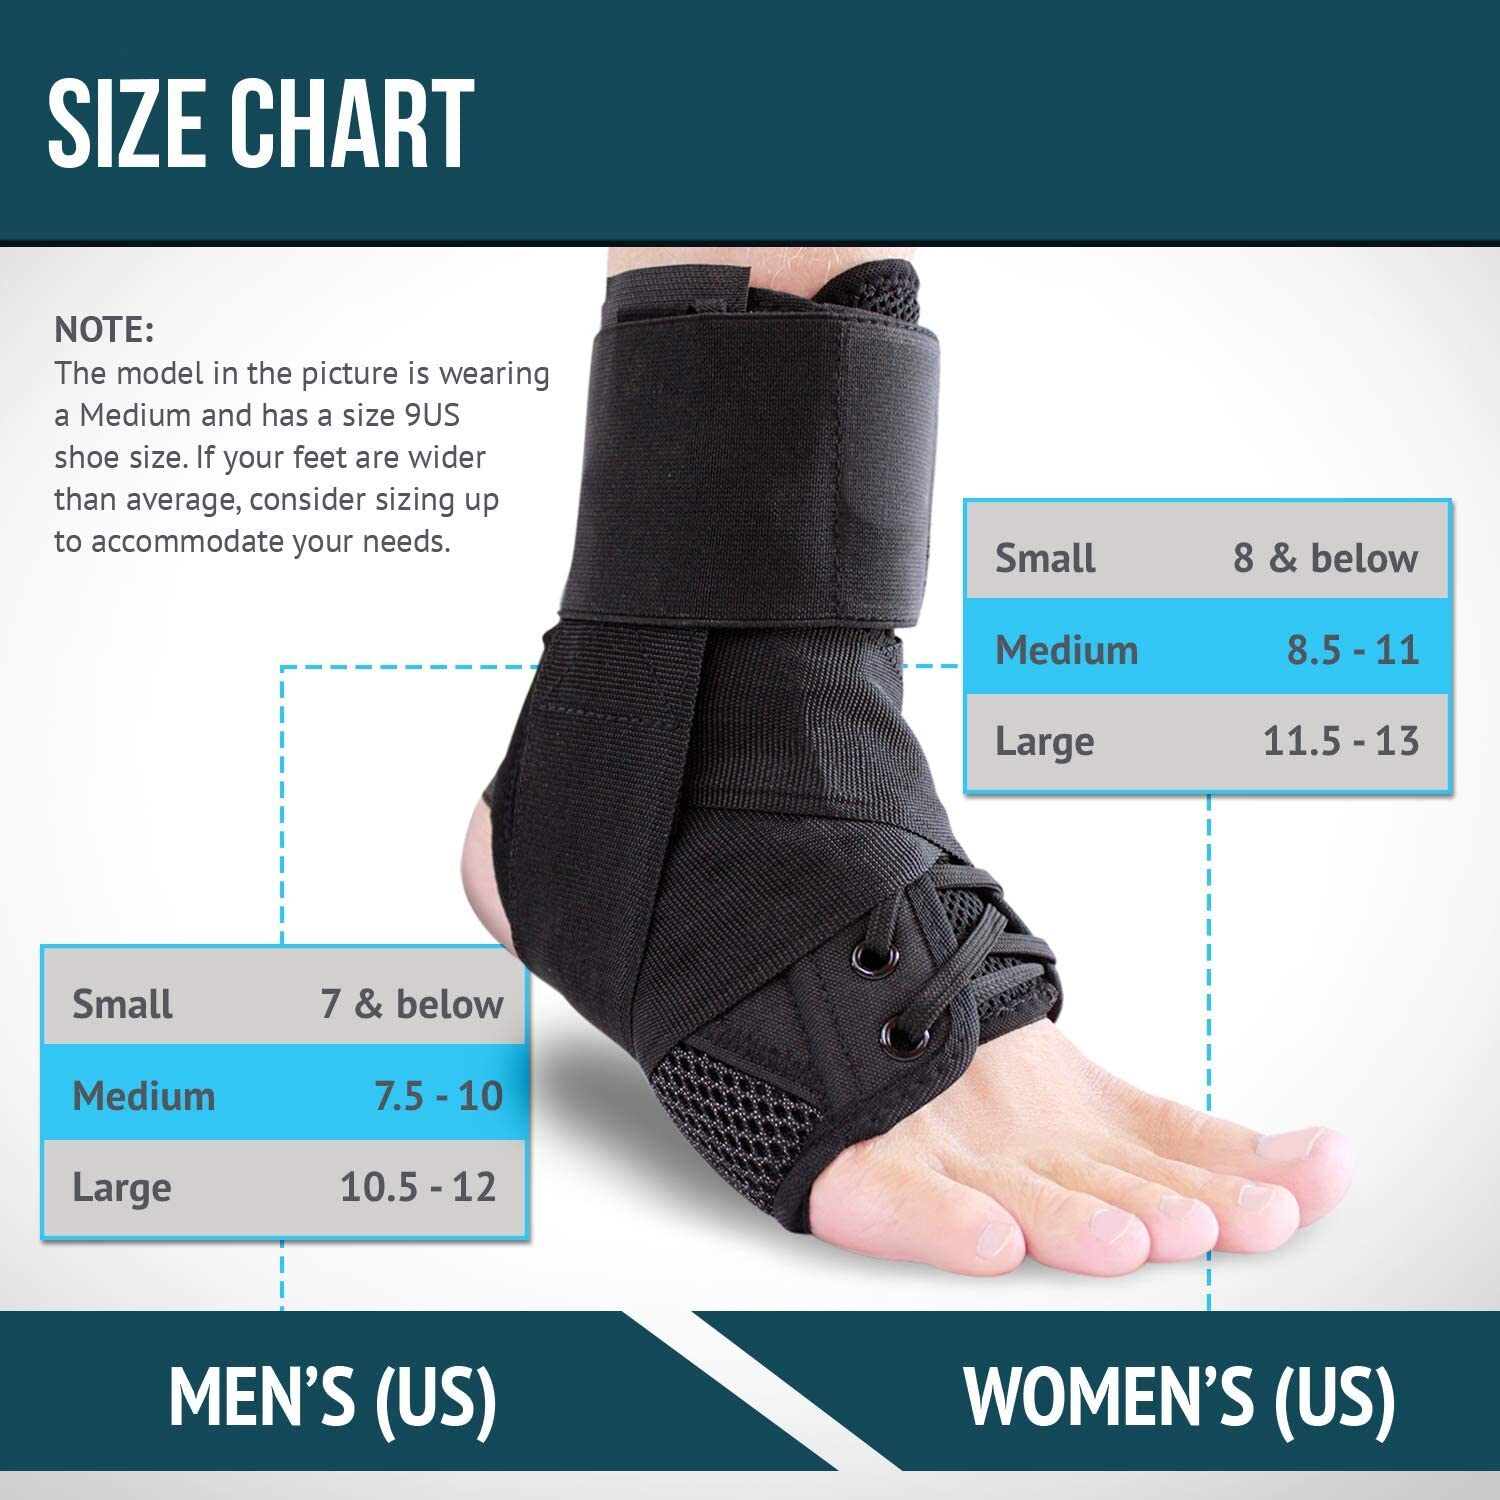 Ankle Support Brace - Nuova Health